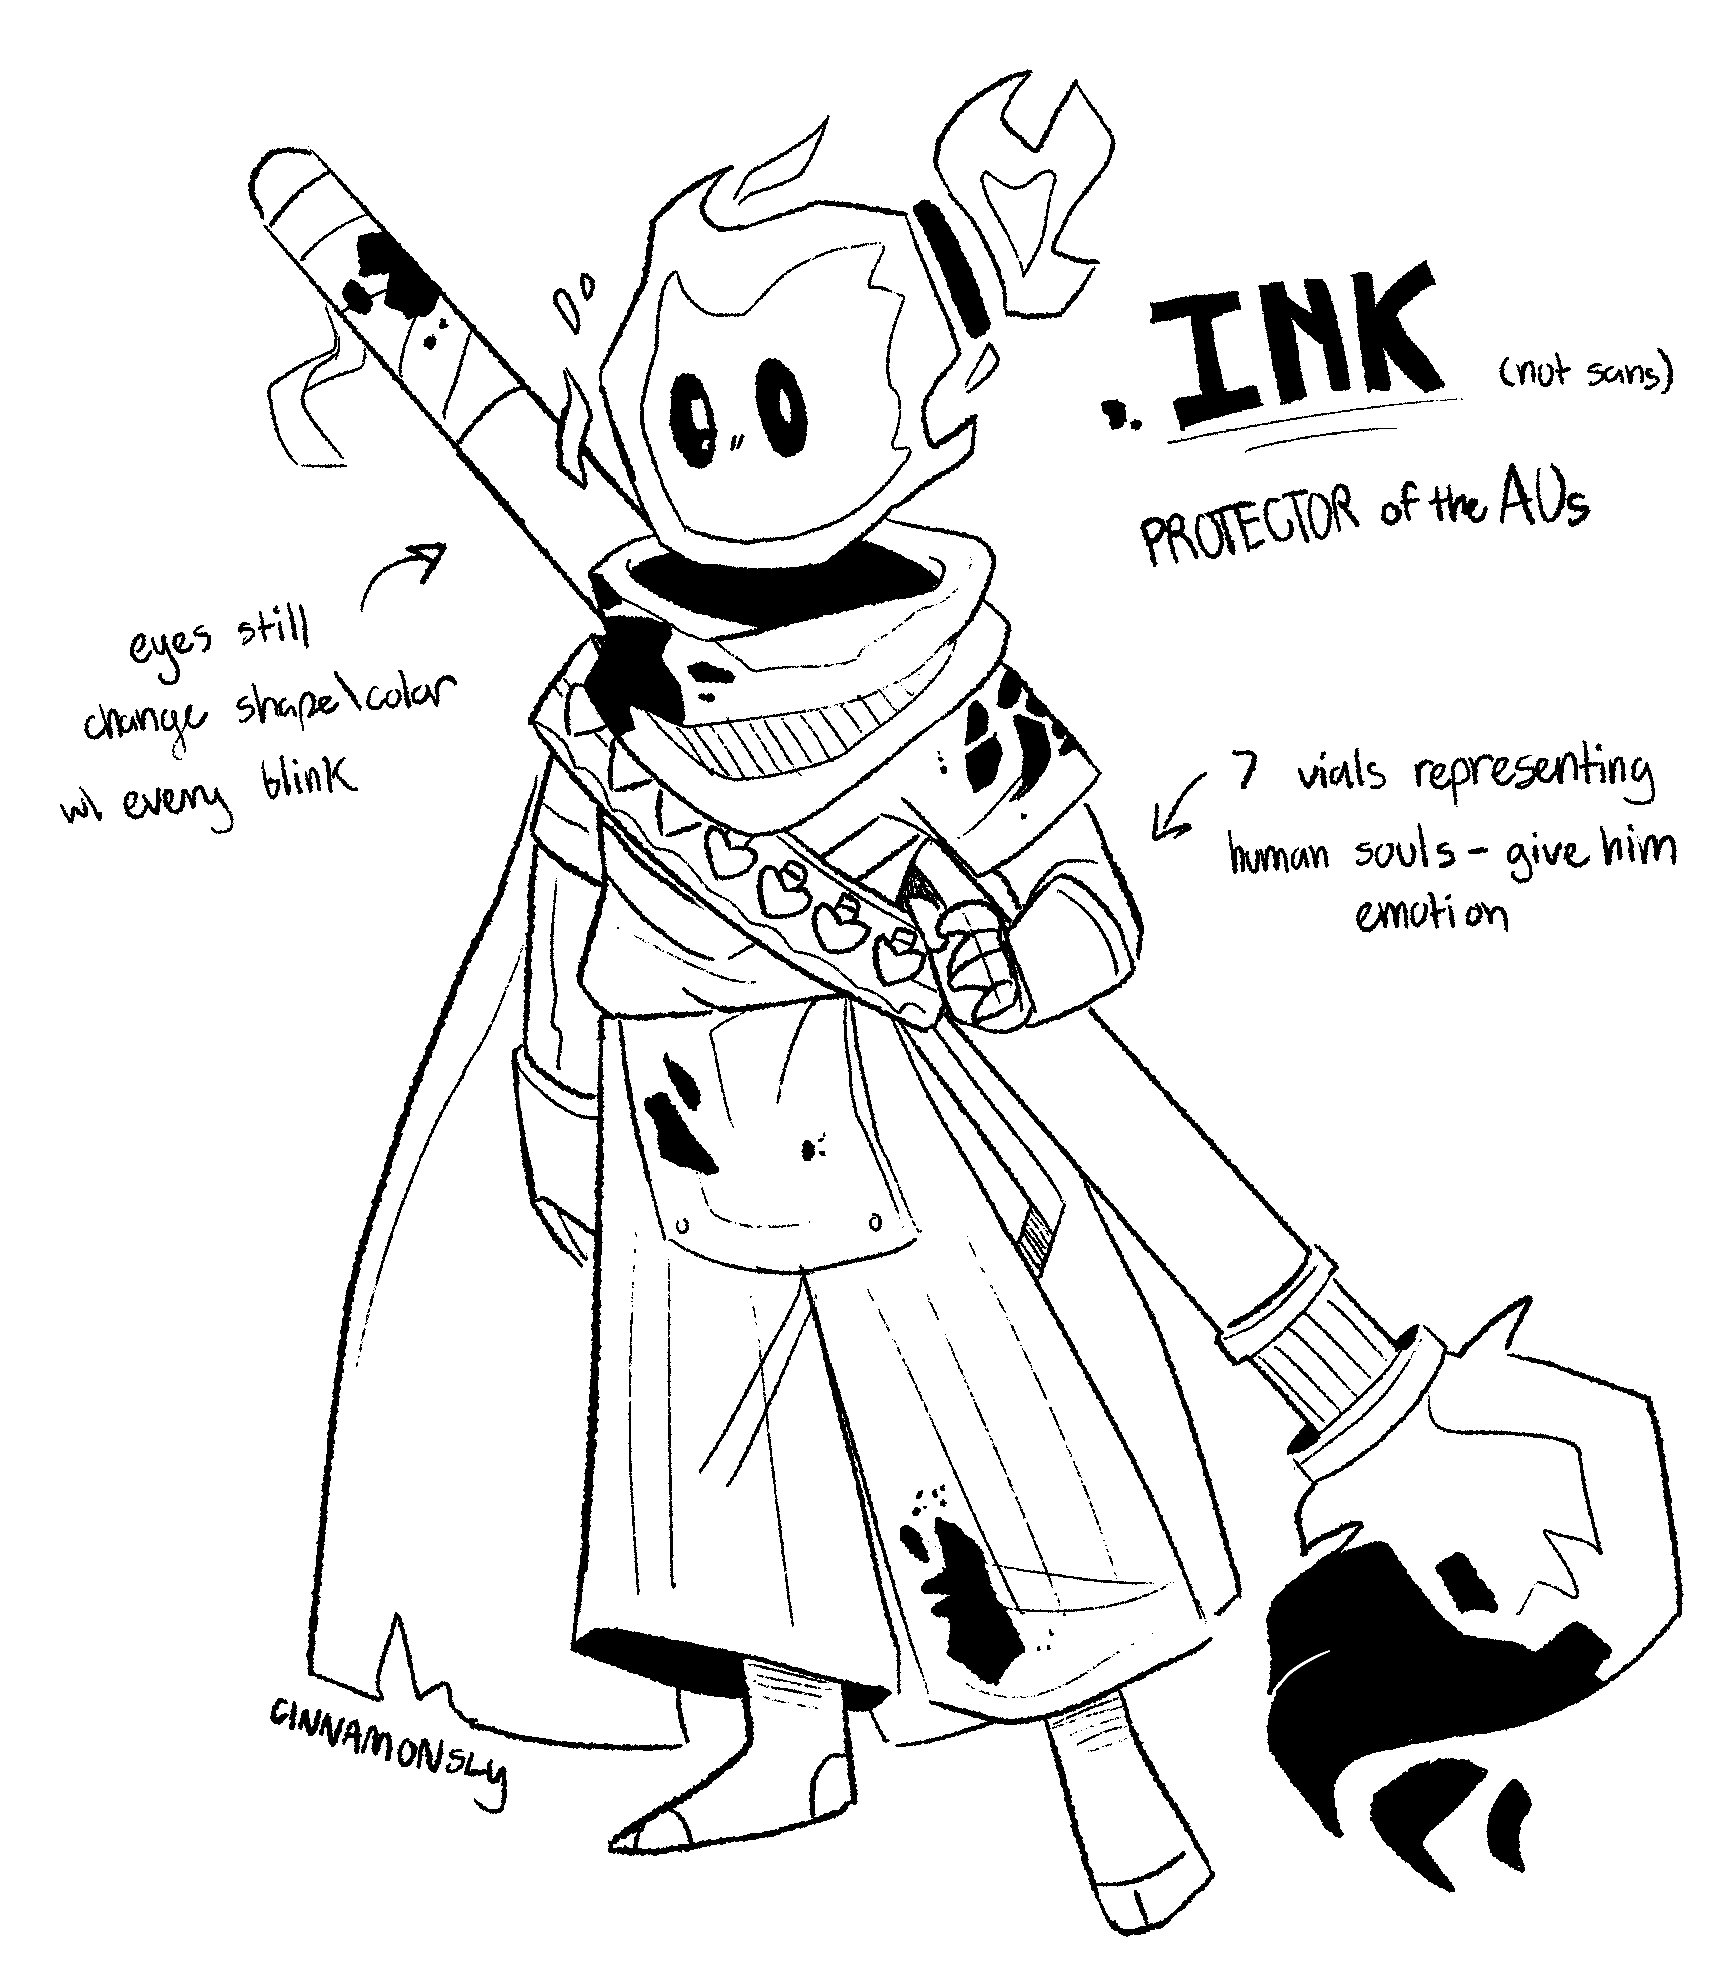 sly ❄️🎄 on X: ink sans has been a hot topic on the tl lately so i tried  redesigning him into a completely unique character, aka not based on  anyone. idk he's